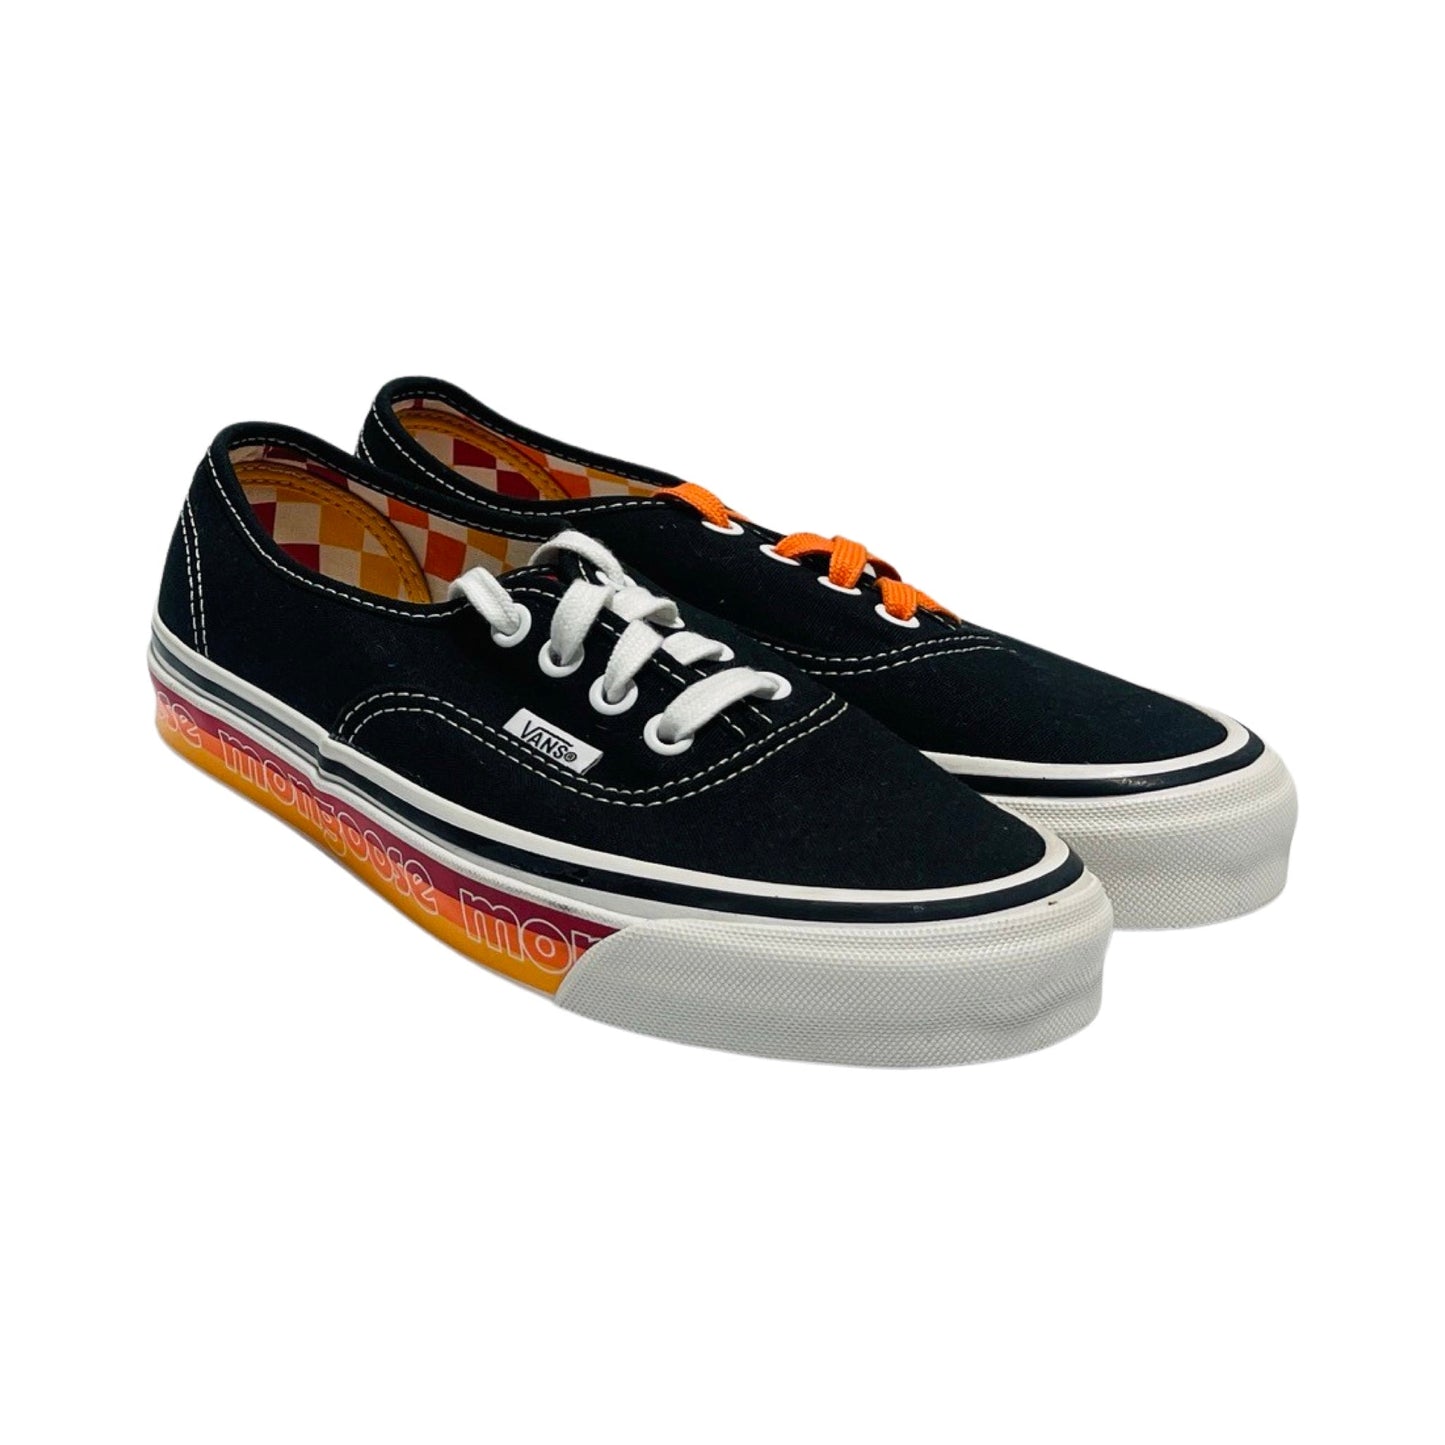 Shoes Sneakers By Vans Our Legends Size: 7